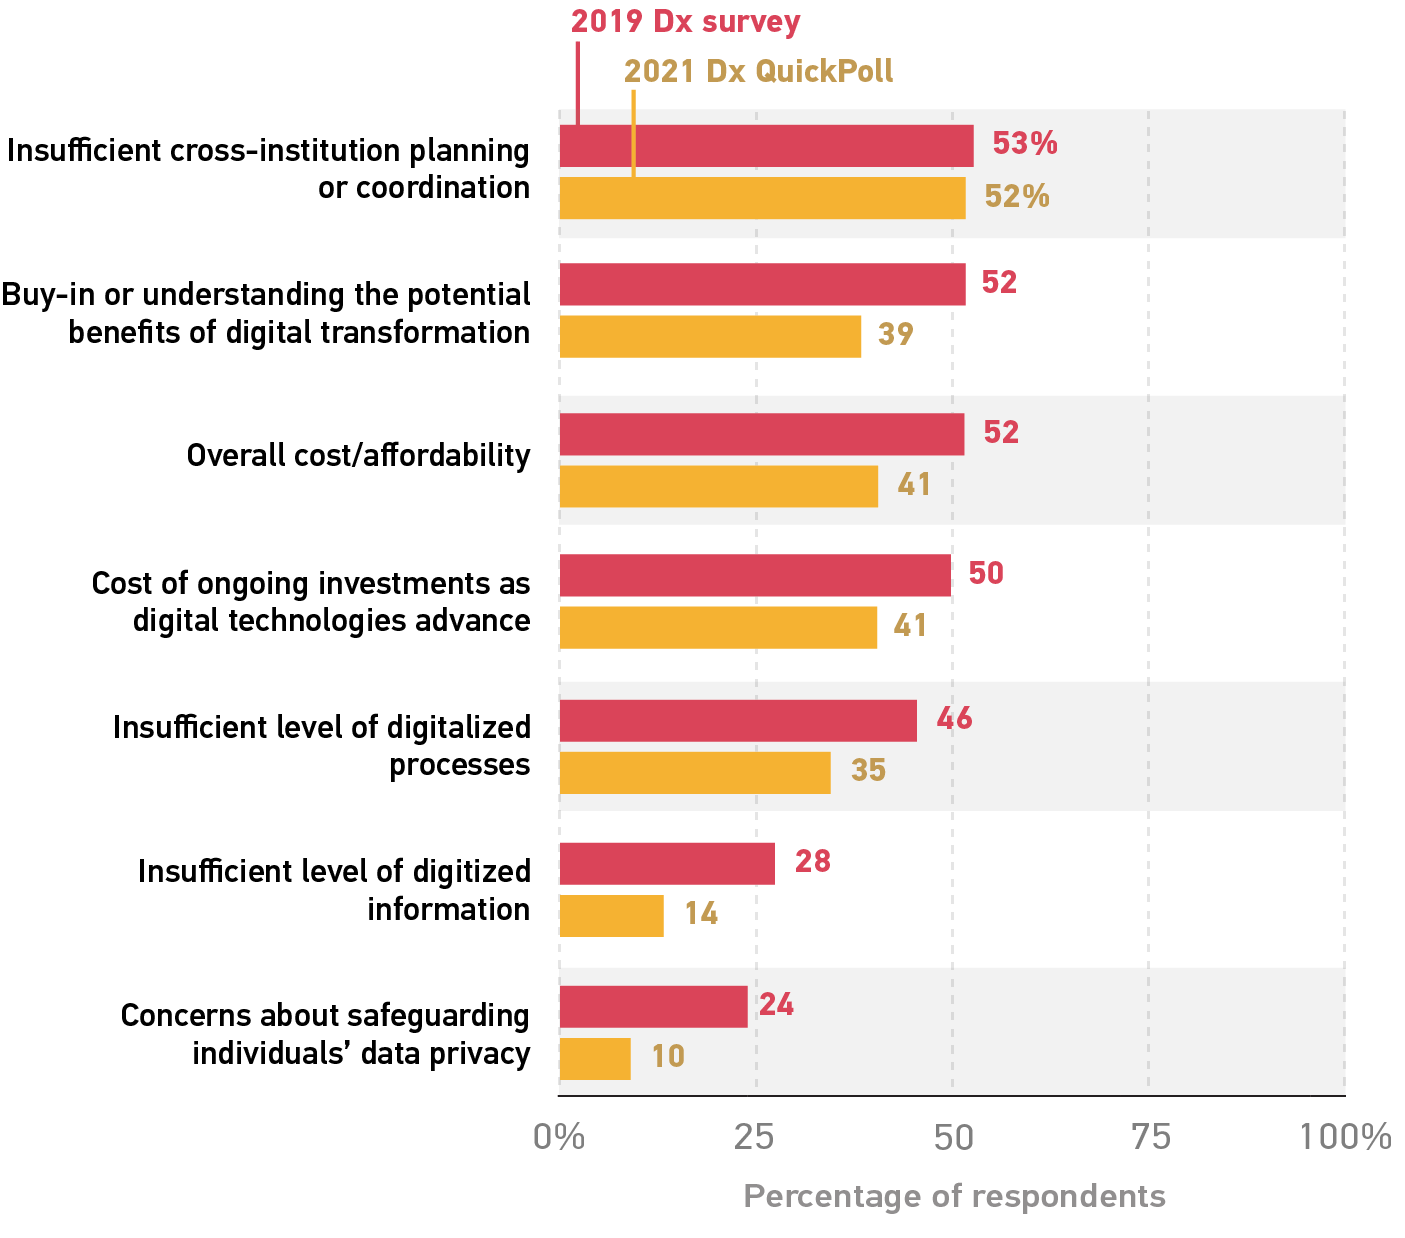 bar graph showing percentage of respondents saying each item is a major barrier in 2019 vs 2021. Insufficient cross-institution planning or coordination, 2019 53%, 2021 52%. 
Buy-in or understanding the potential benefits of digital transformation, 2019 52%, 2021 39%.  
Overall cost/affordability, 2019 52%, 2021 41%. 
Cost of ongoing investments as digital technologies advance, 2019 50%, 2021 41%.  
Insufficient level of digitalized processes, 2019 46%, 2021 35%.  
Insufficient level of digitized information, 2019 28%, 2021 14%. 
Concerns about safeguarding individuals' data privacy, 2019 24%, 2021 10%.  